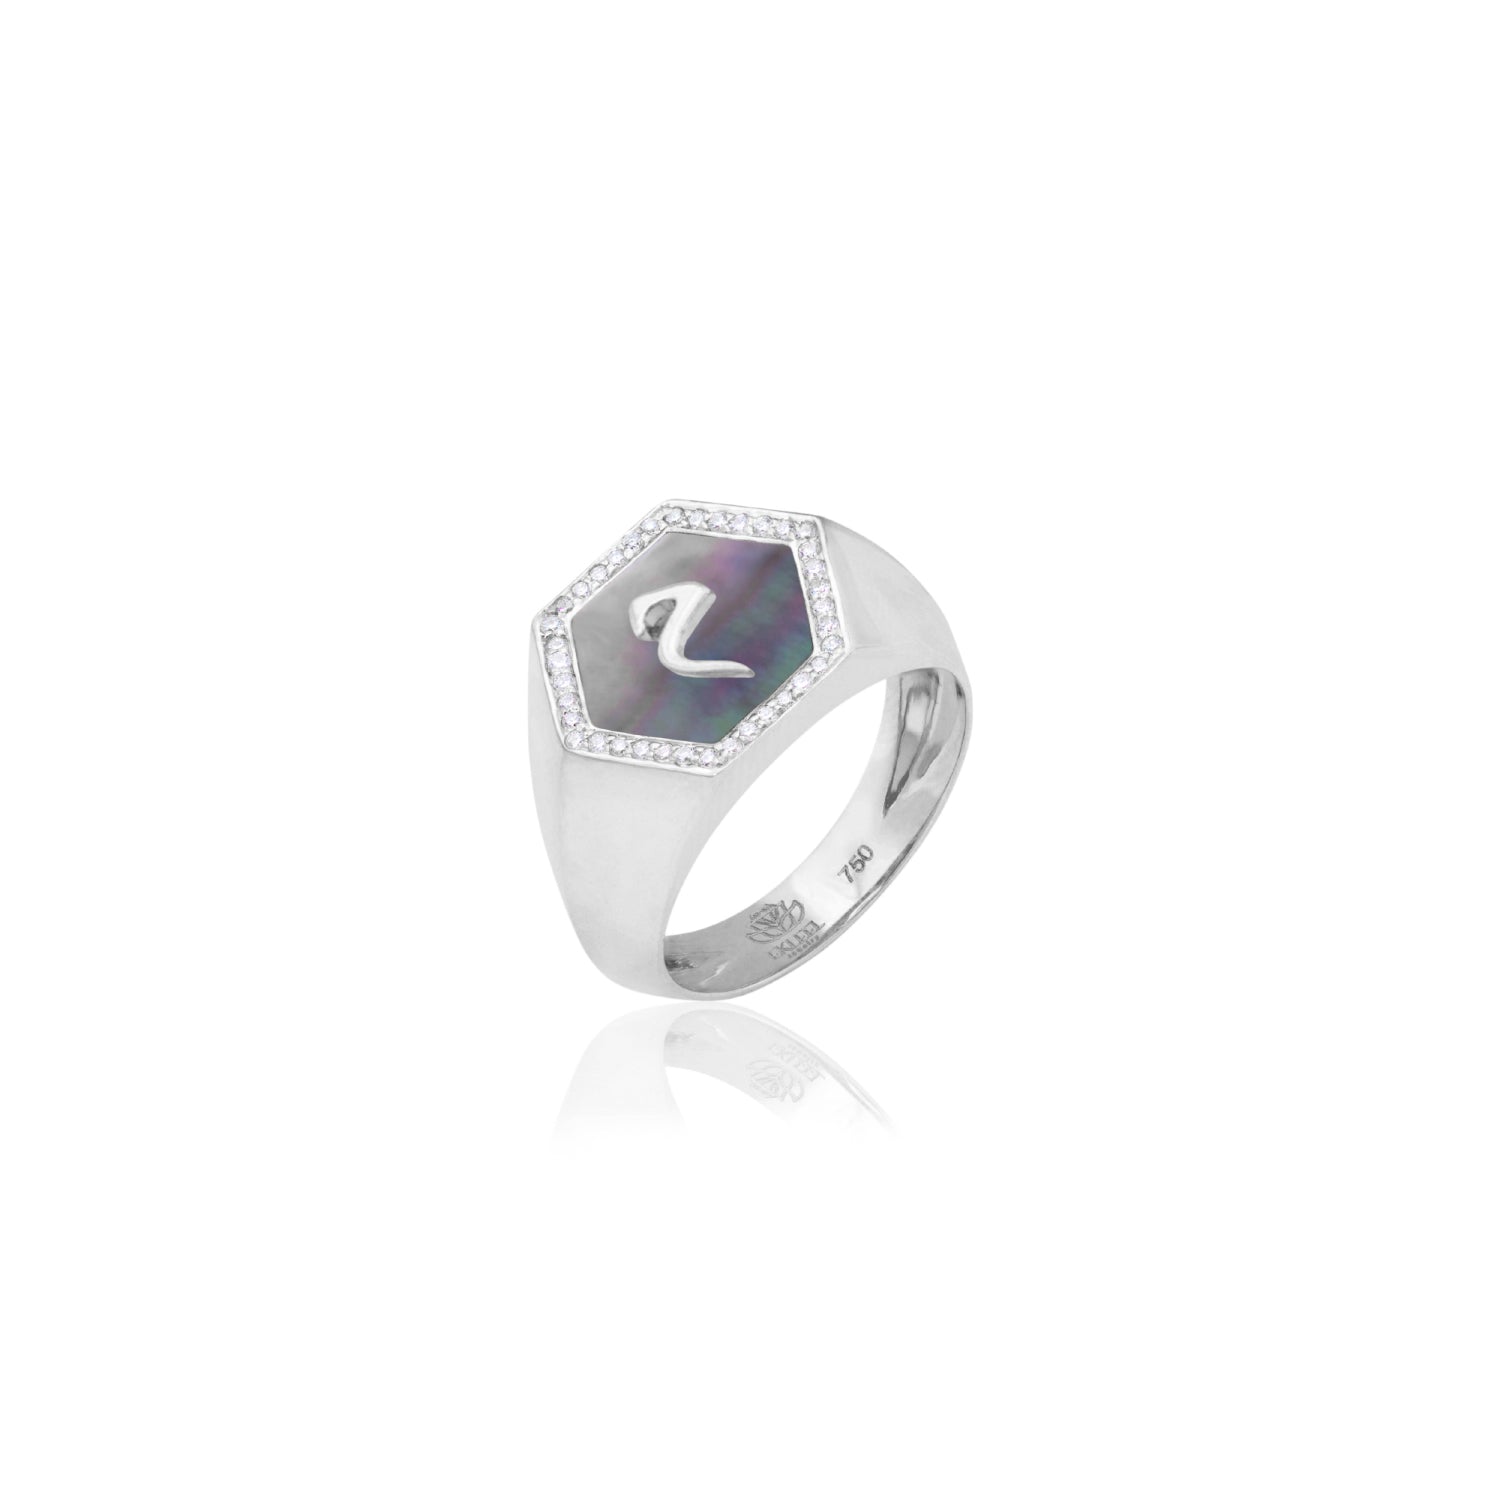 Qamoos 2.0 Letter م Black Mother of Pearl and Diamond Signet Ring in White Gold